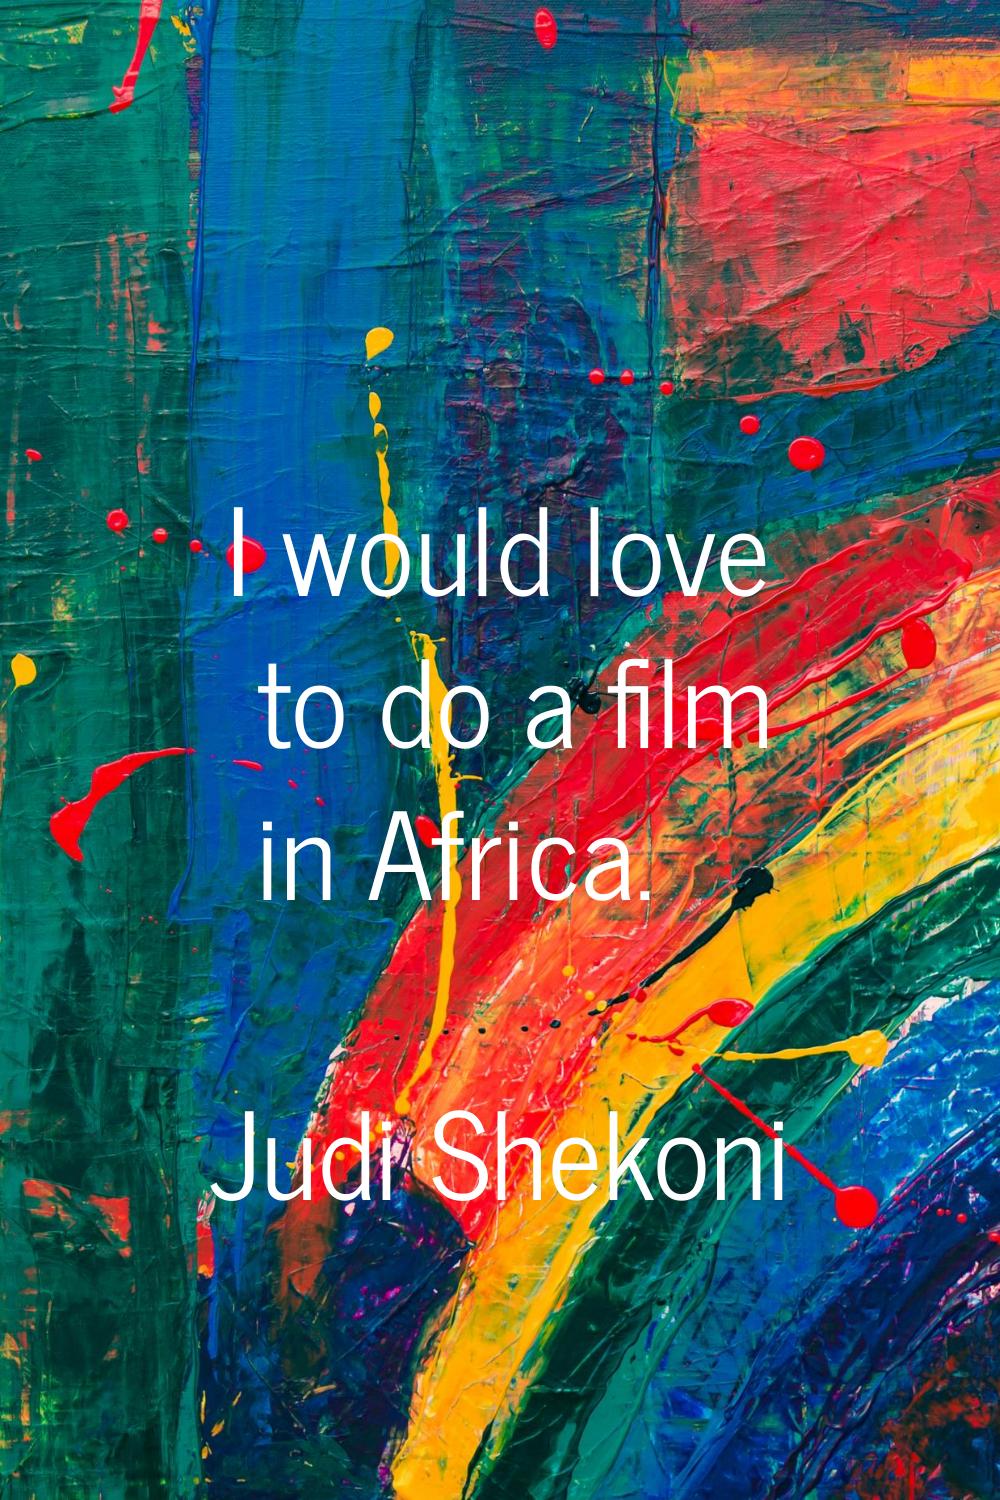 I would love to do a film in Africa.